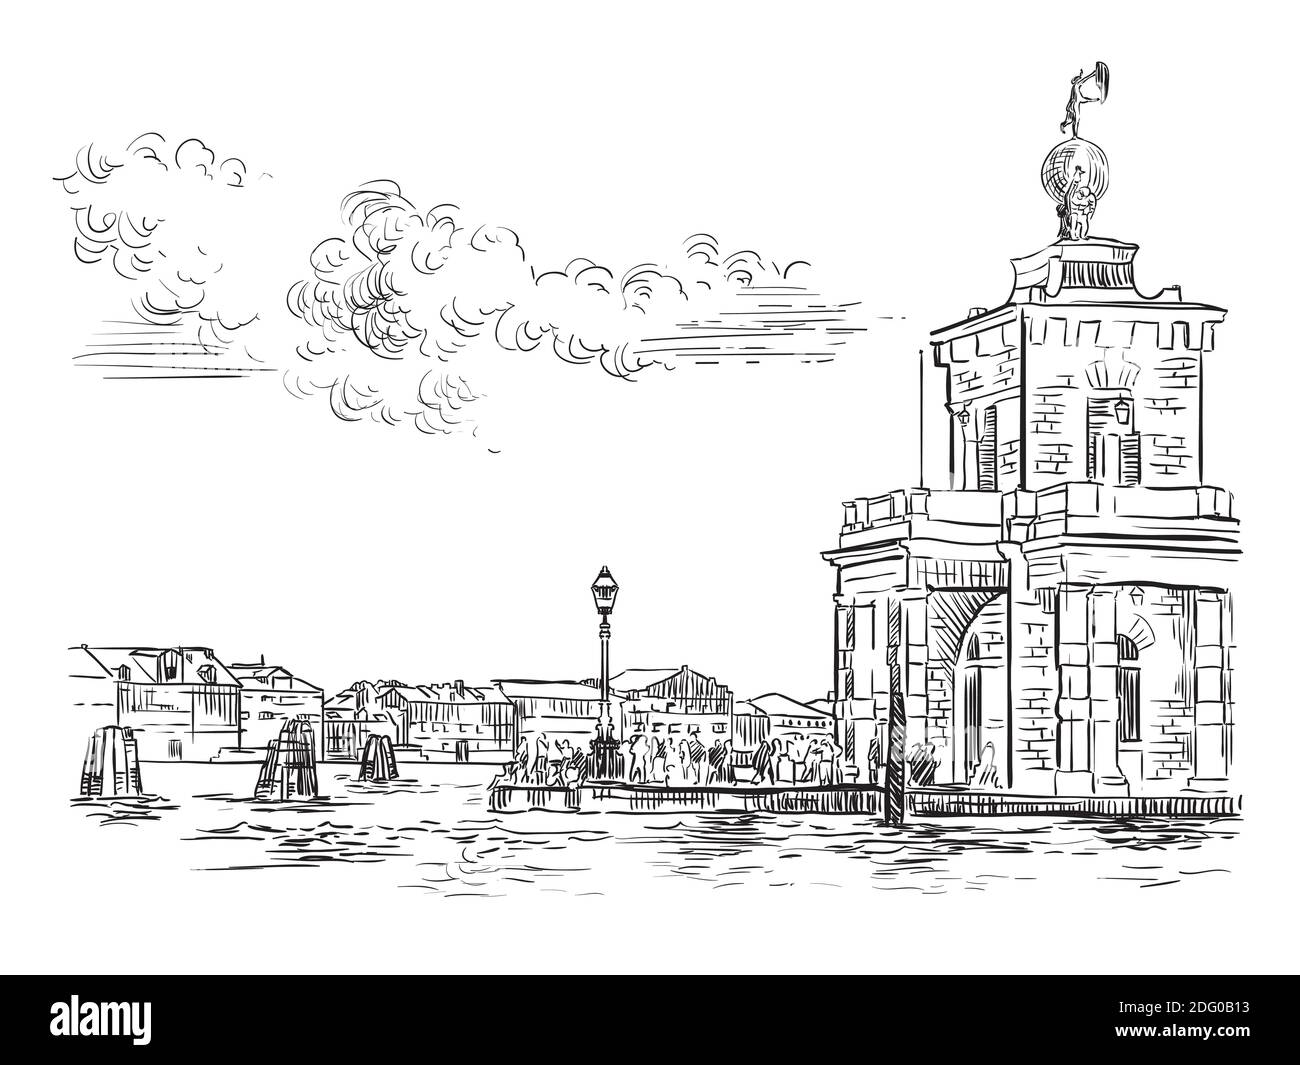 Vector hand drawing sketch illustration of Della Dogane Punta in Venice. Venice skyline hand drawn sketch in black color isolated on white background. Stock Vector